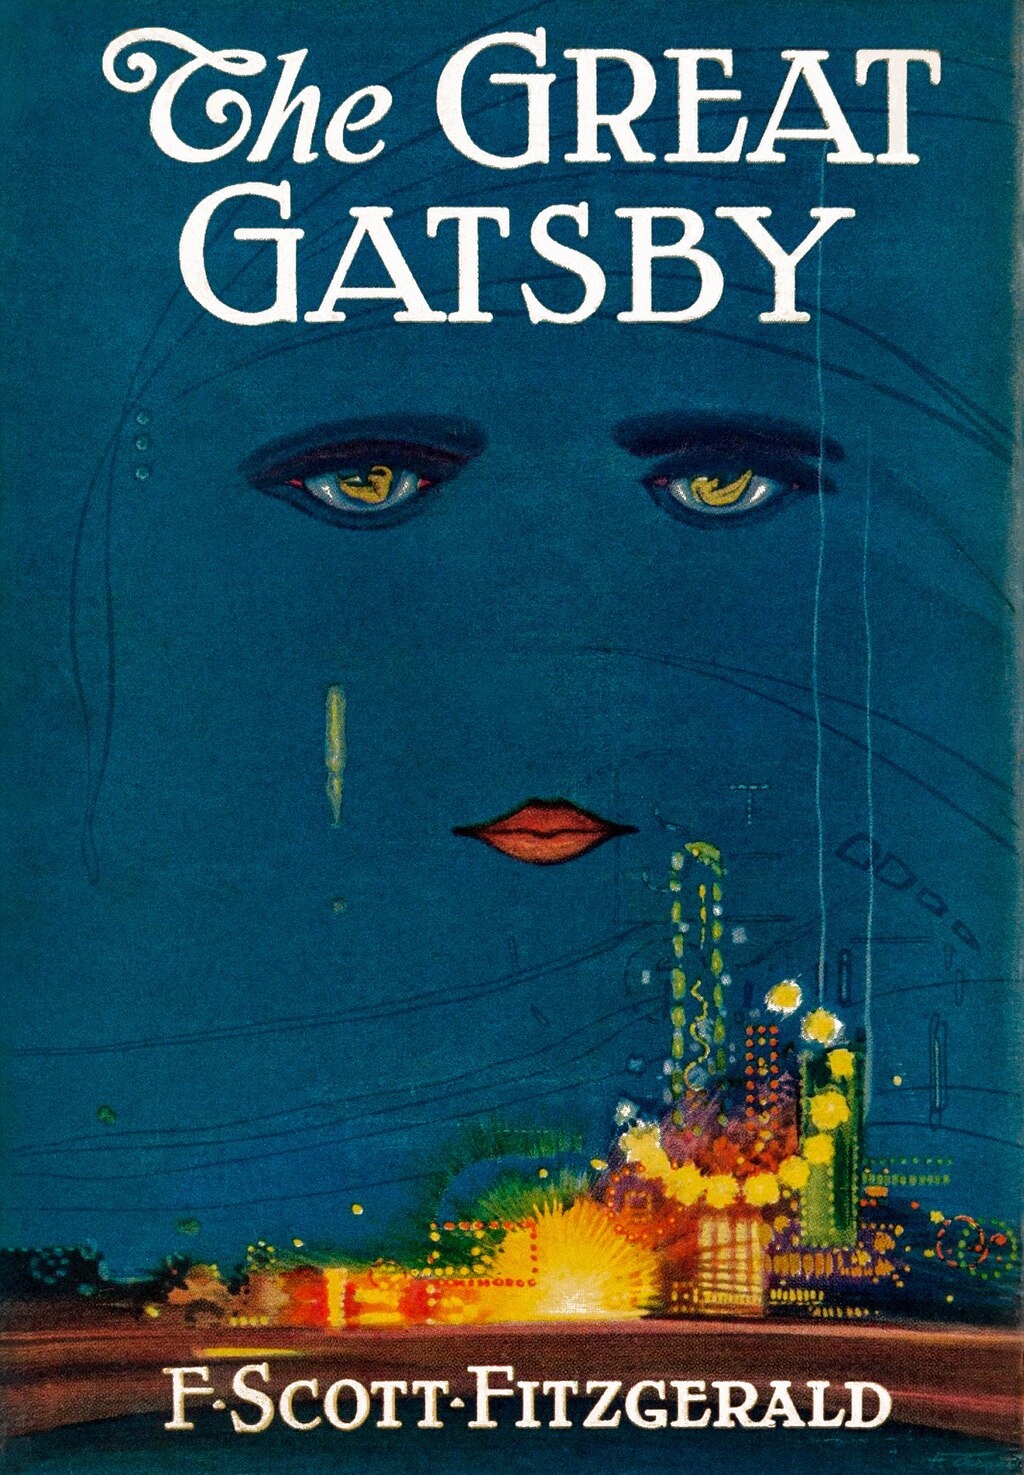 Cover of "The Great Gatsby" by F. Scott Fitzgerald, featuring a stylized illustration of a face with bright eyes over a cityscape with colorful lights.